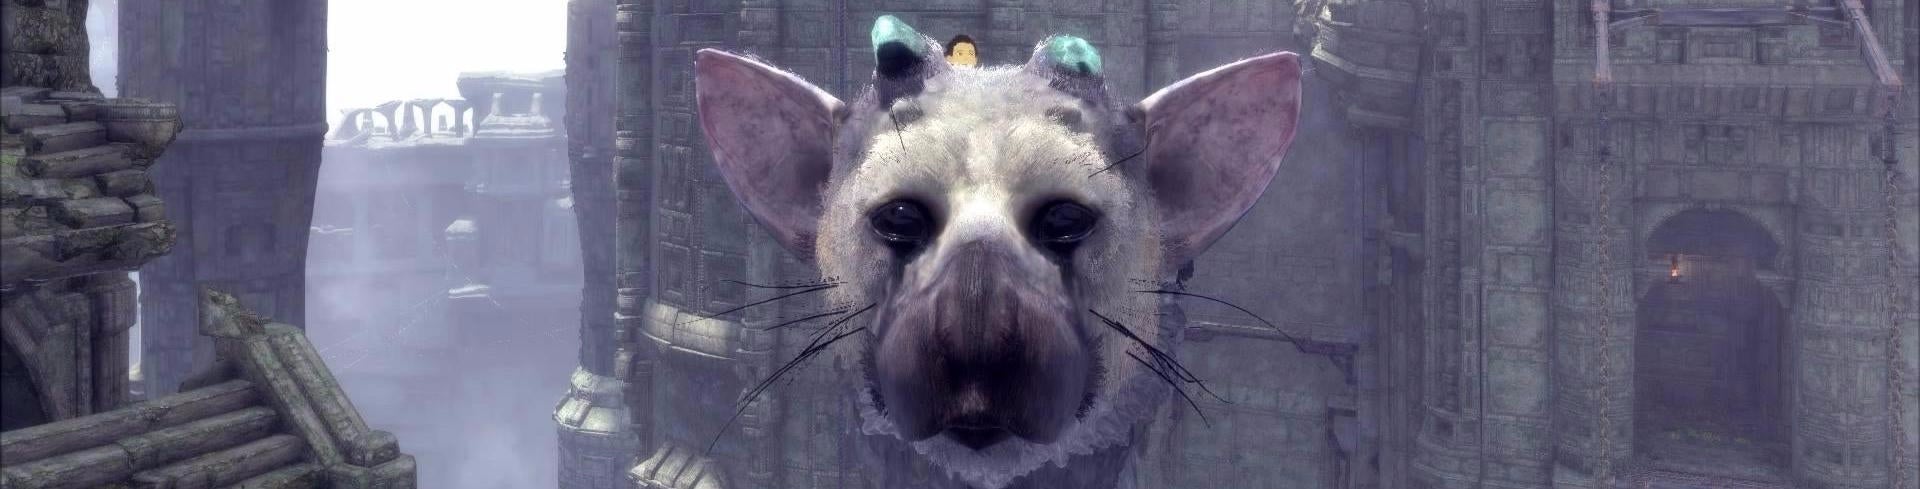 Image for Can we talk about the ending of The Last Guardian?